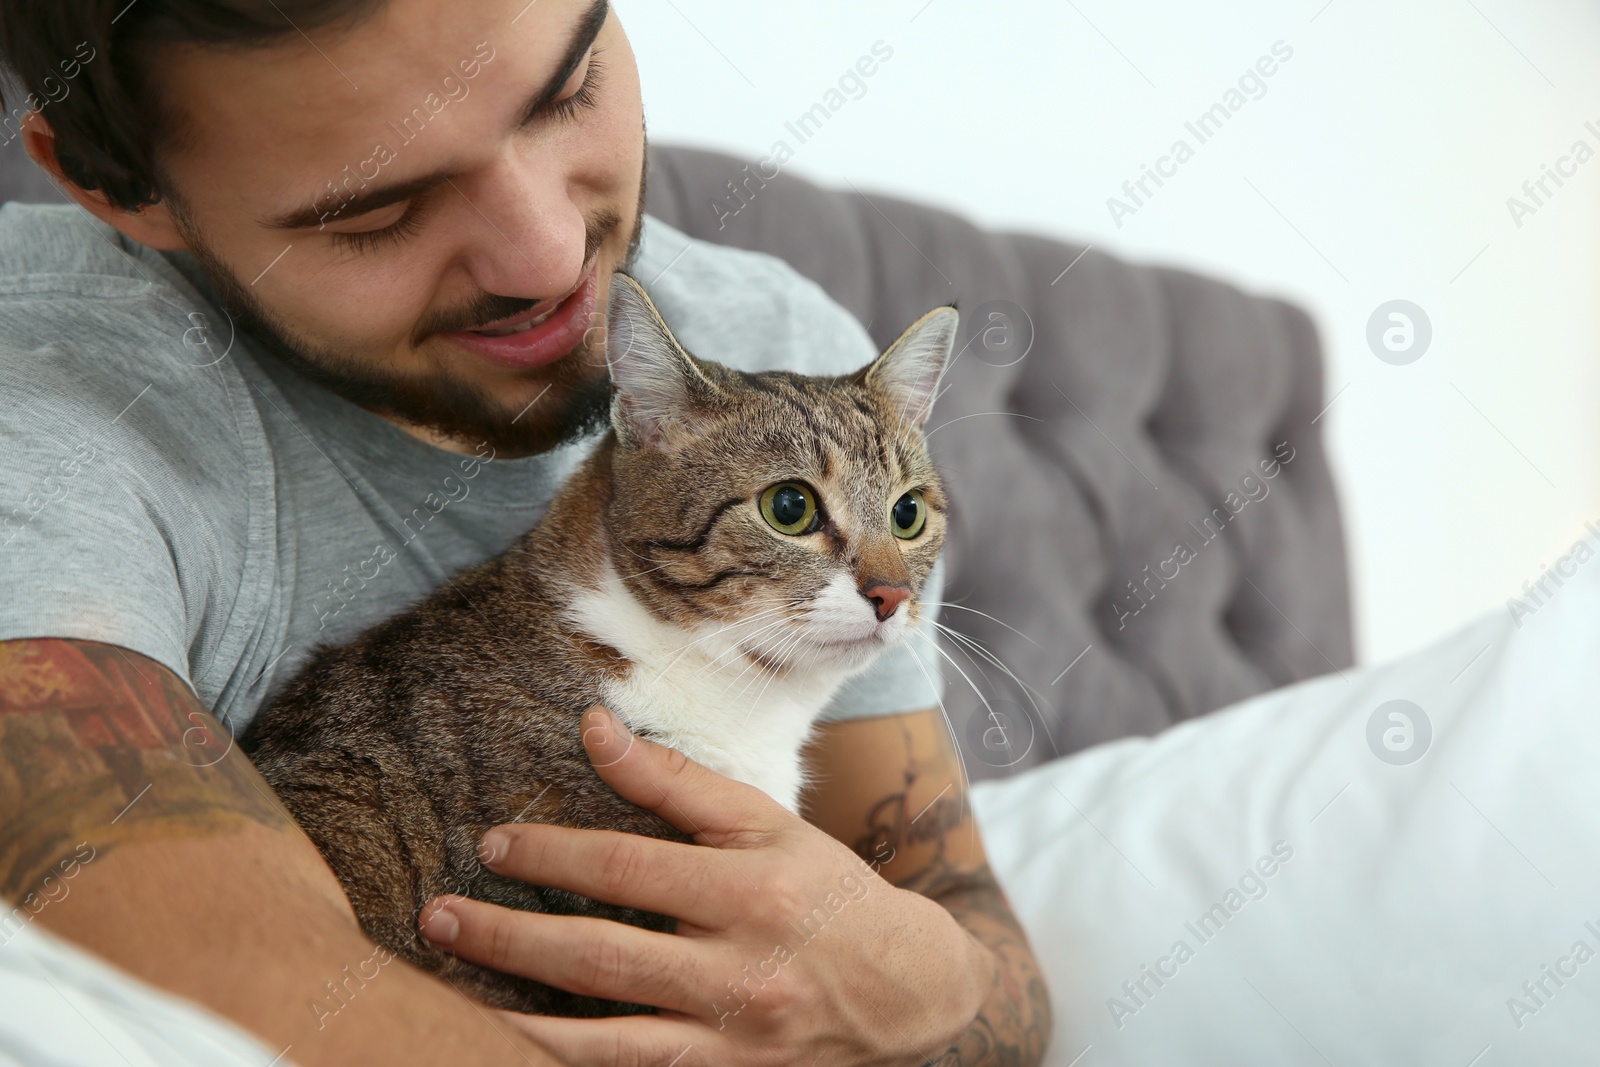 Photo of Happy man with cat on bed at home. Friendly pet